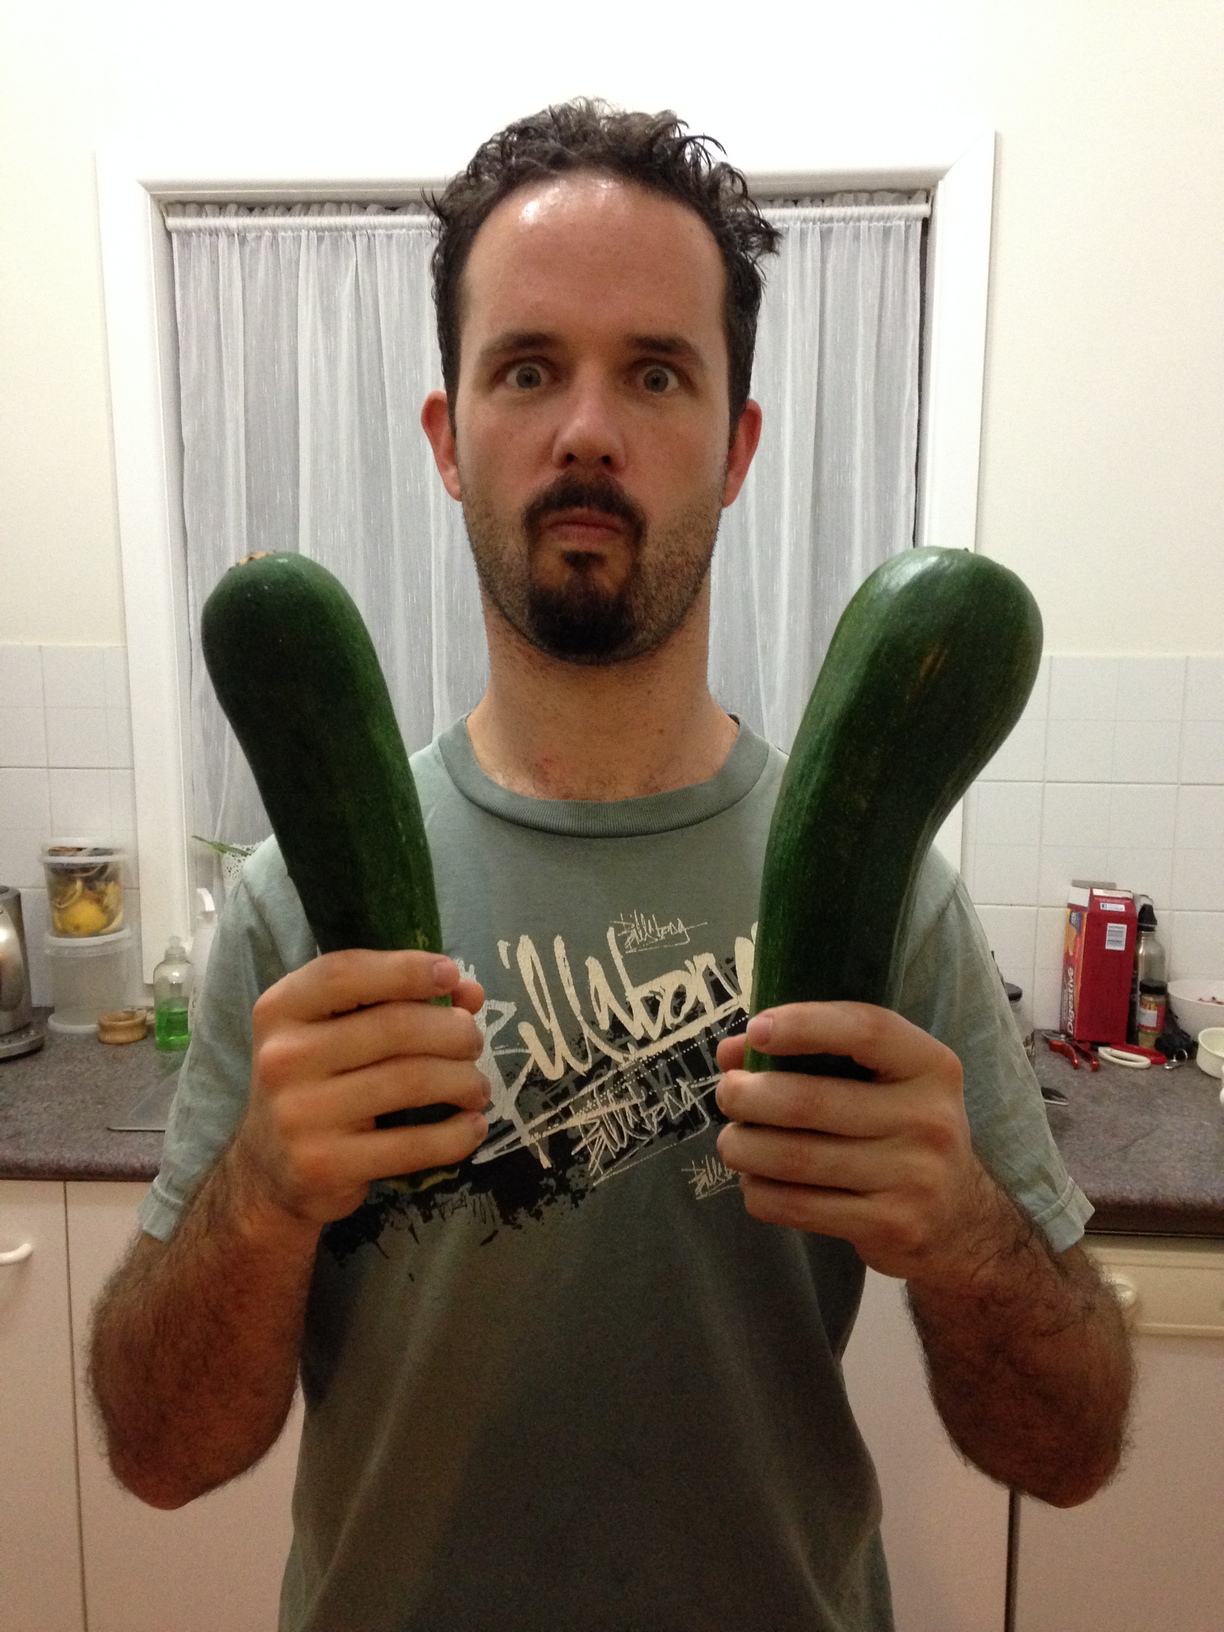 Two rather large zucchinis